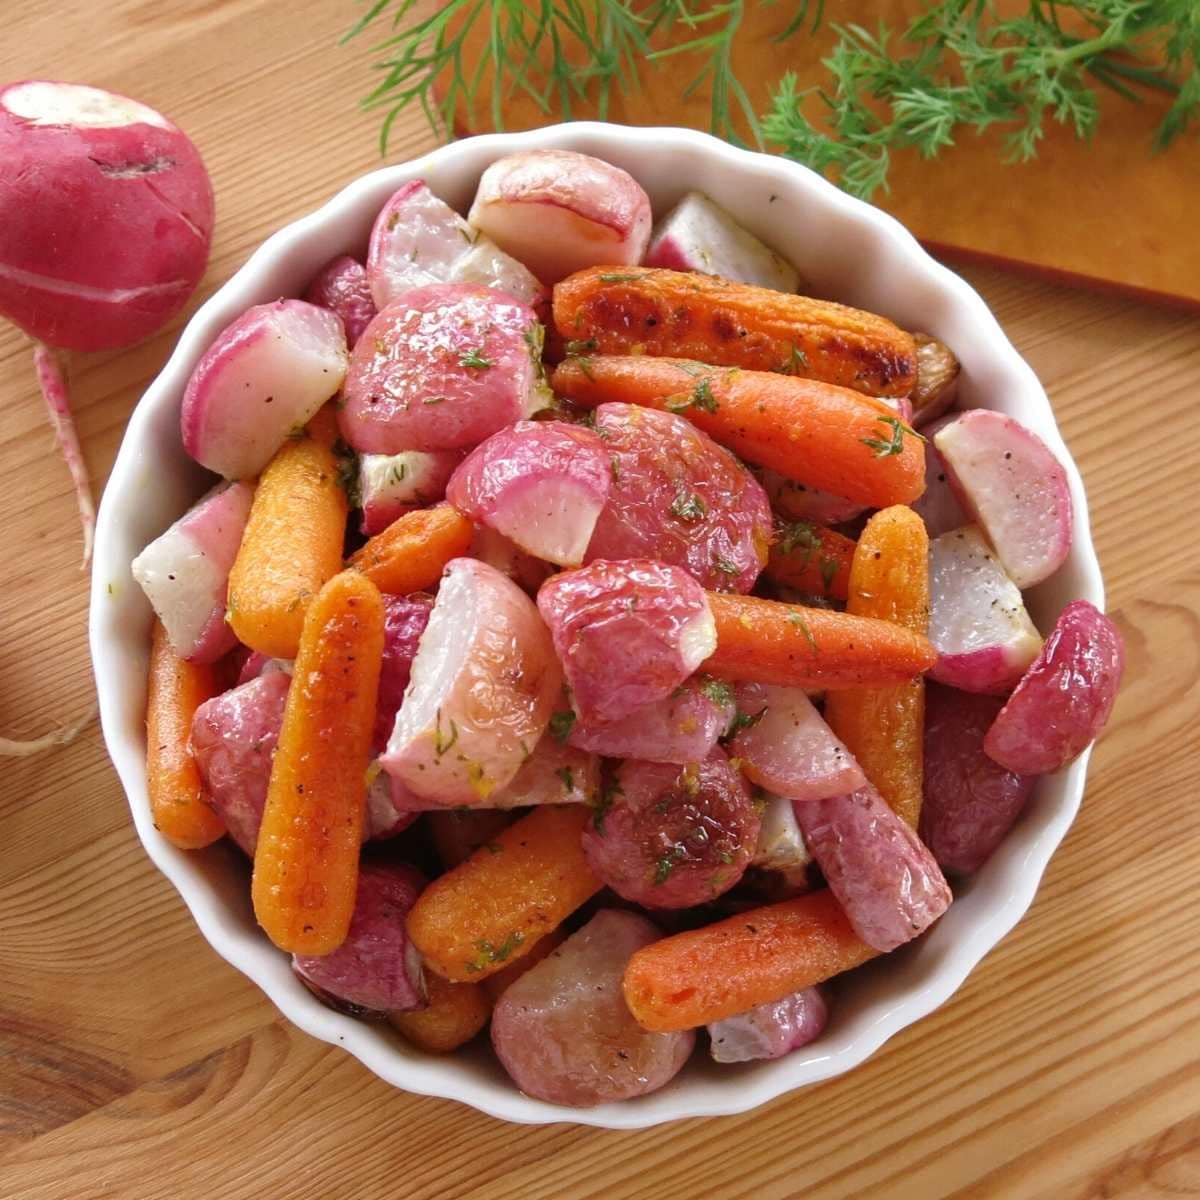 Roasted radishes and carrots